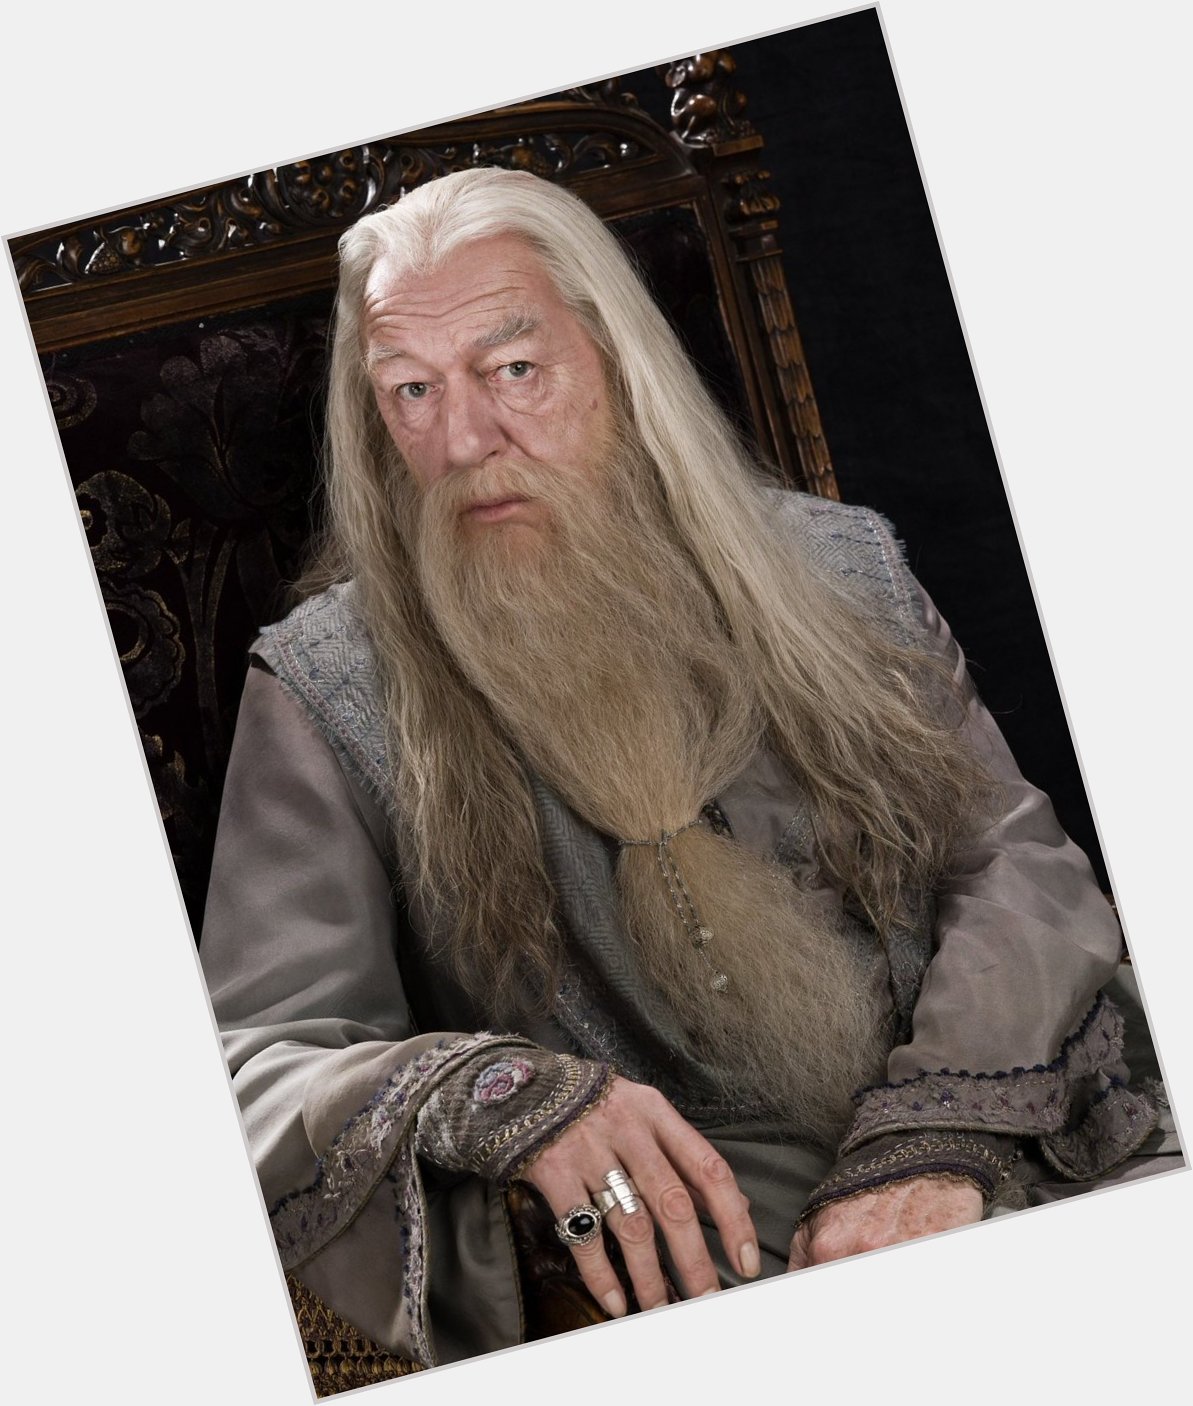  Happy birthday to Michael Gambon who portrayed Albus Dumbledore in the films! 